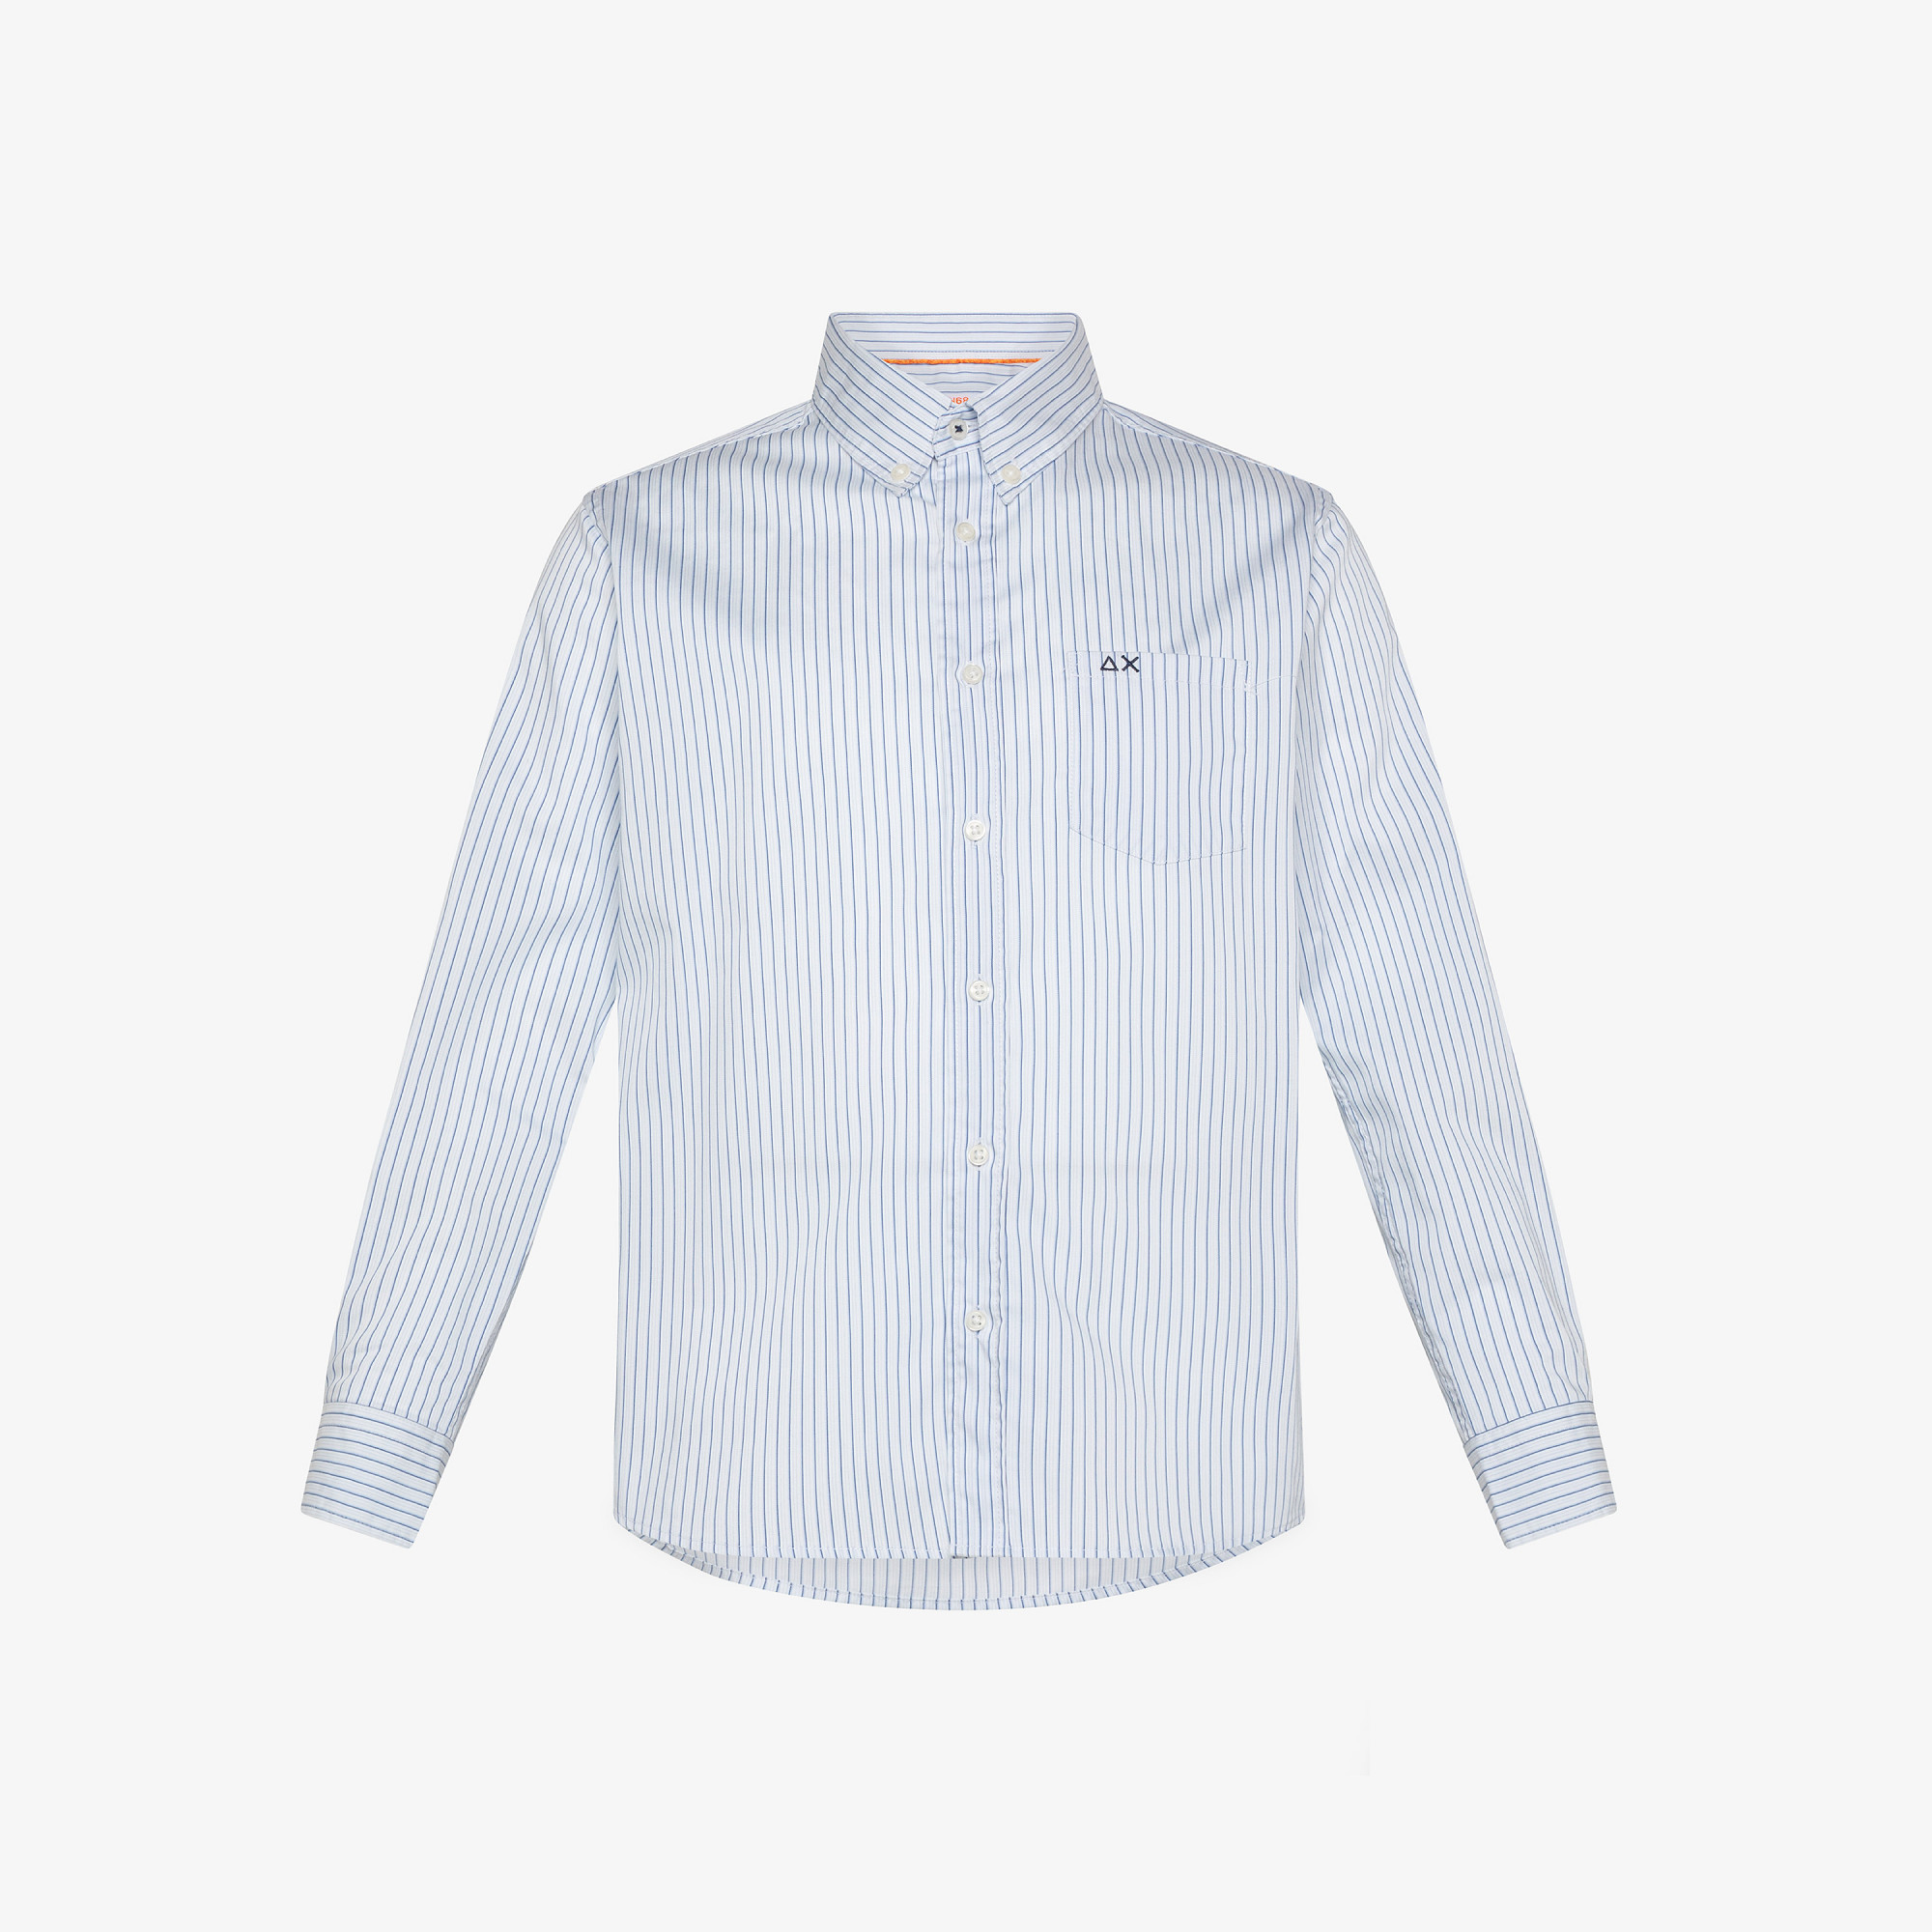 SHIRT STRIPES FRENCH COLLAR L/S OFF WHITE/SKY BLUE